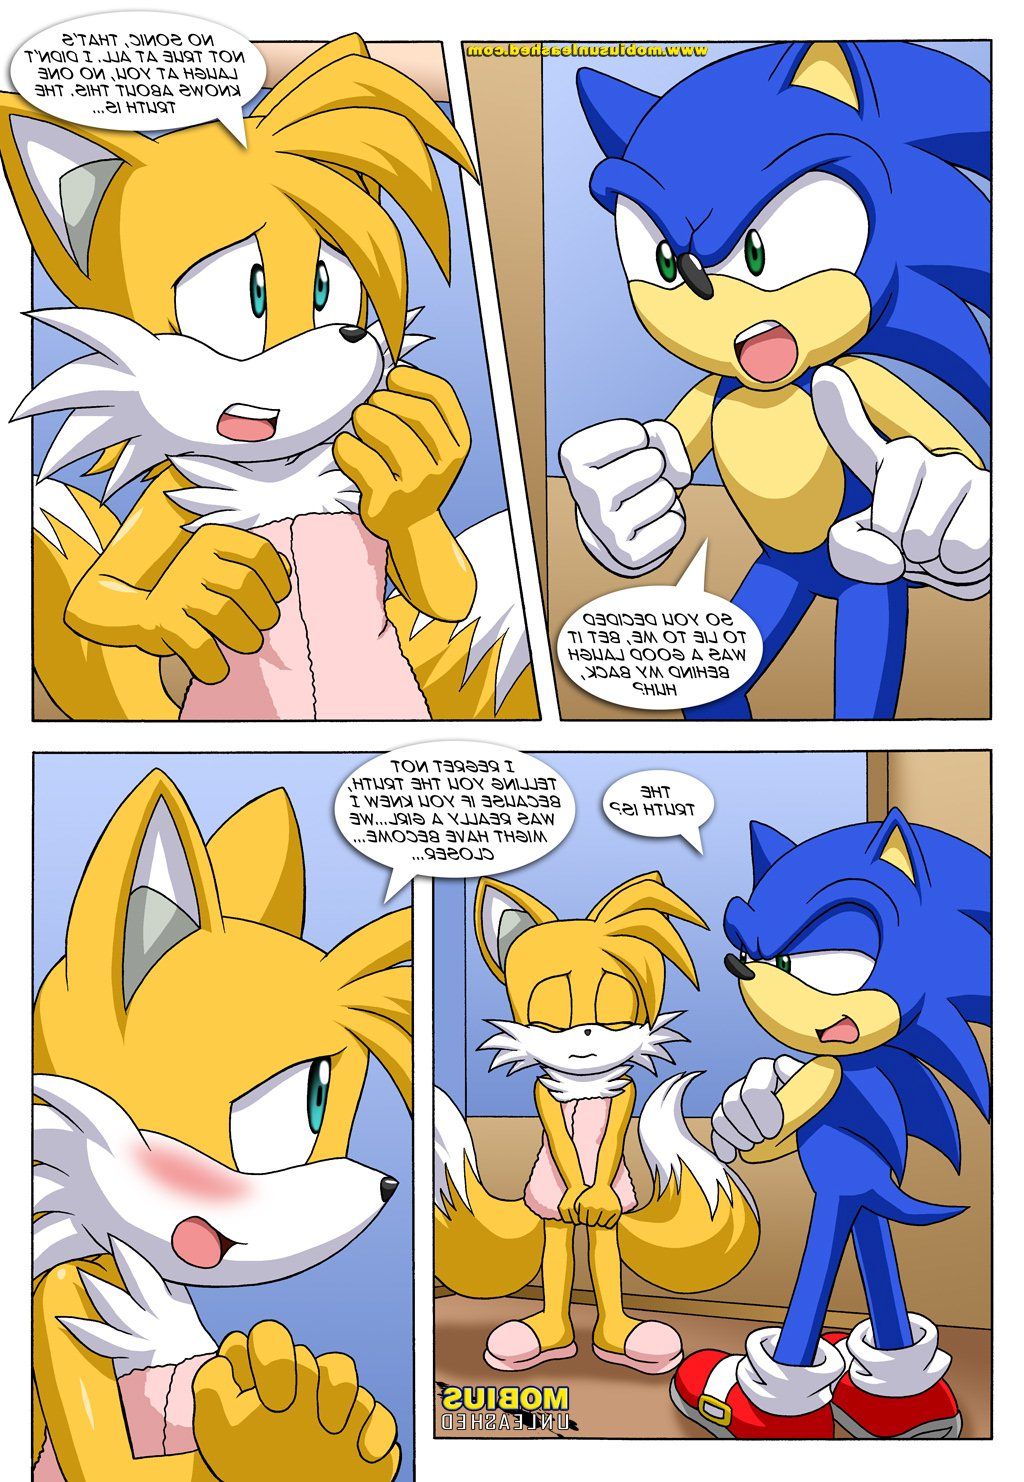 pal-comix-tails-tales image_13455.jpg